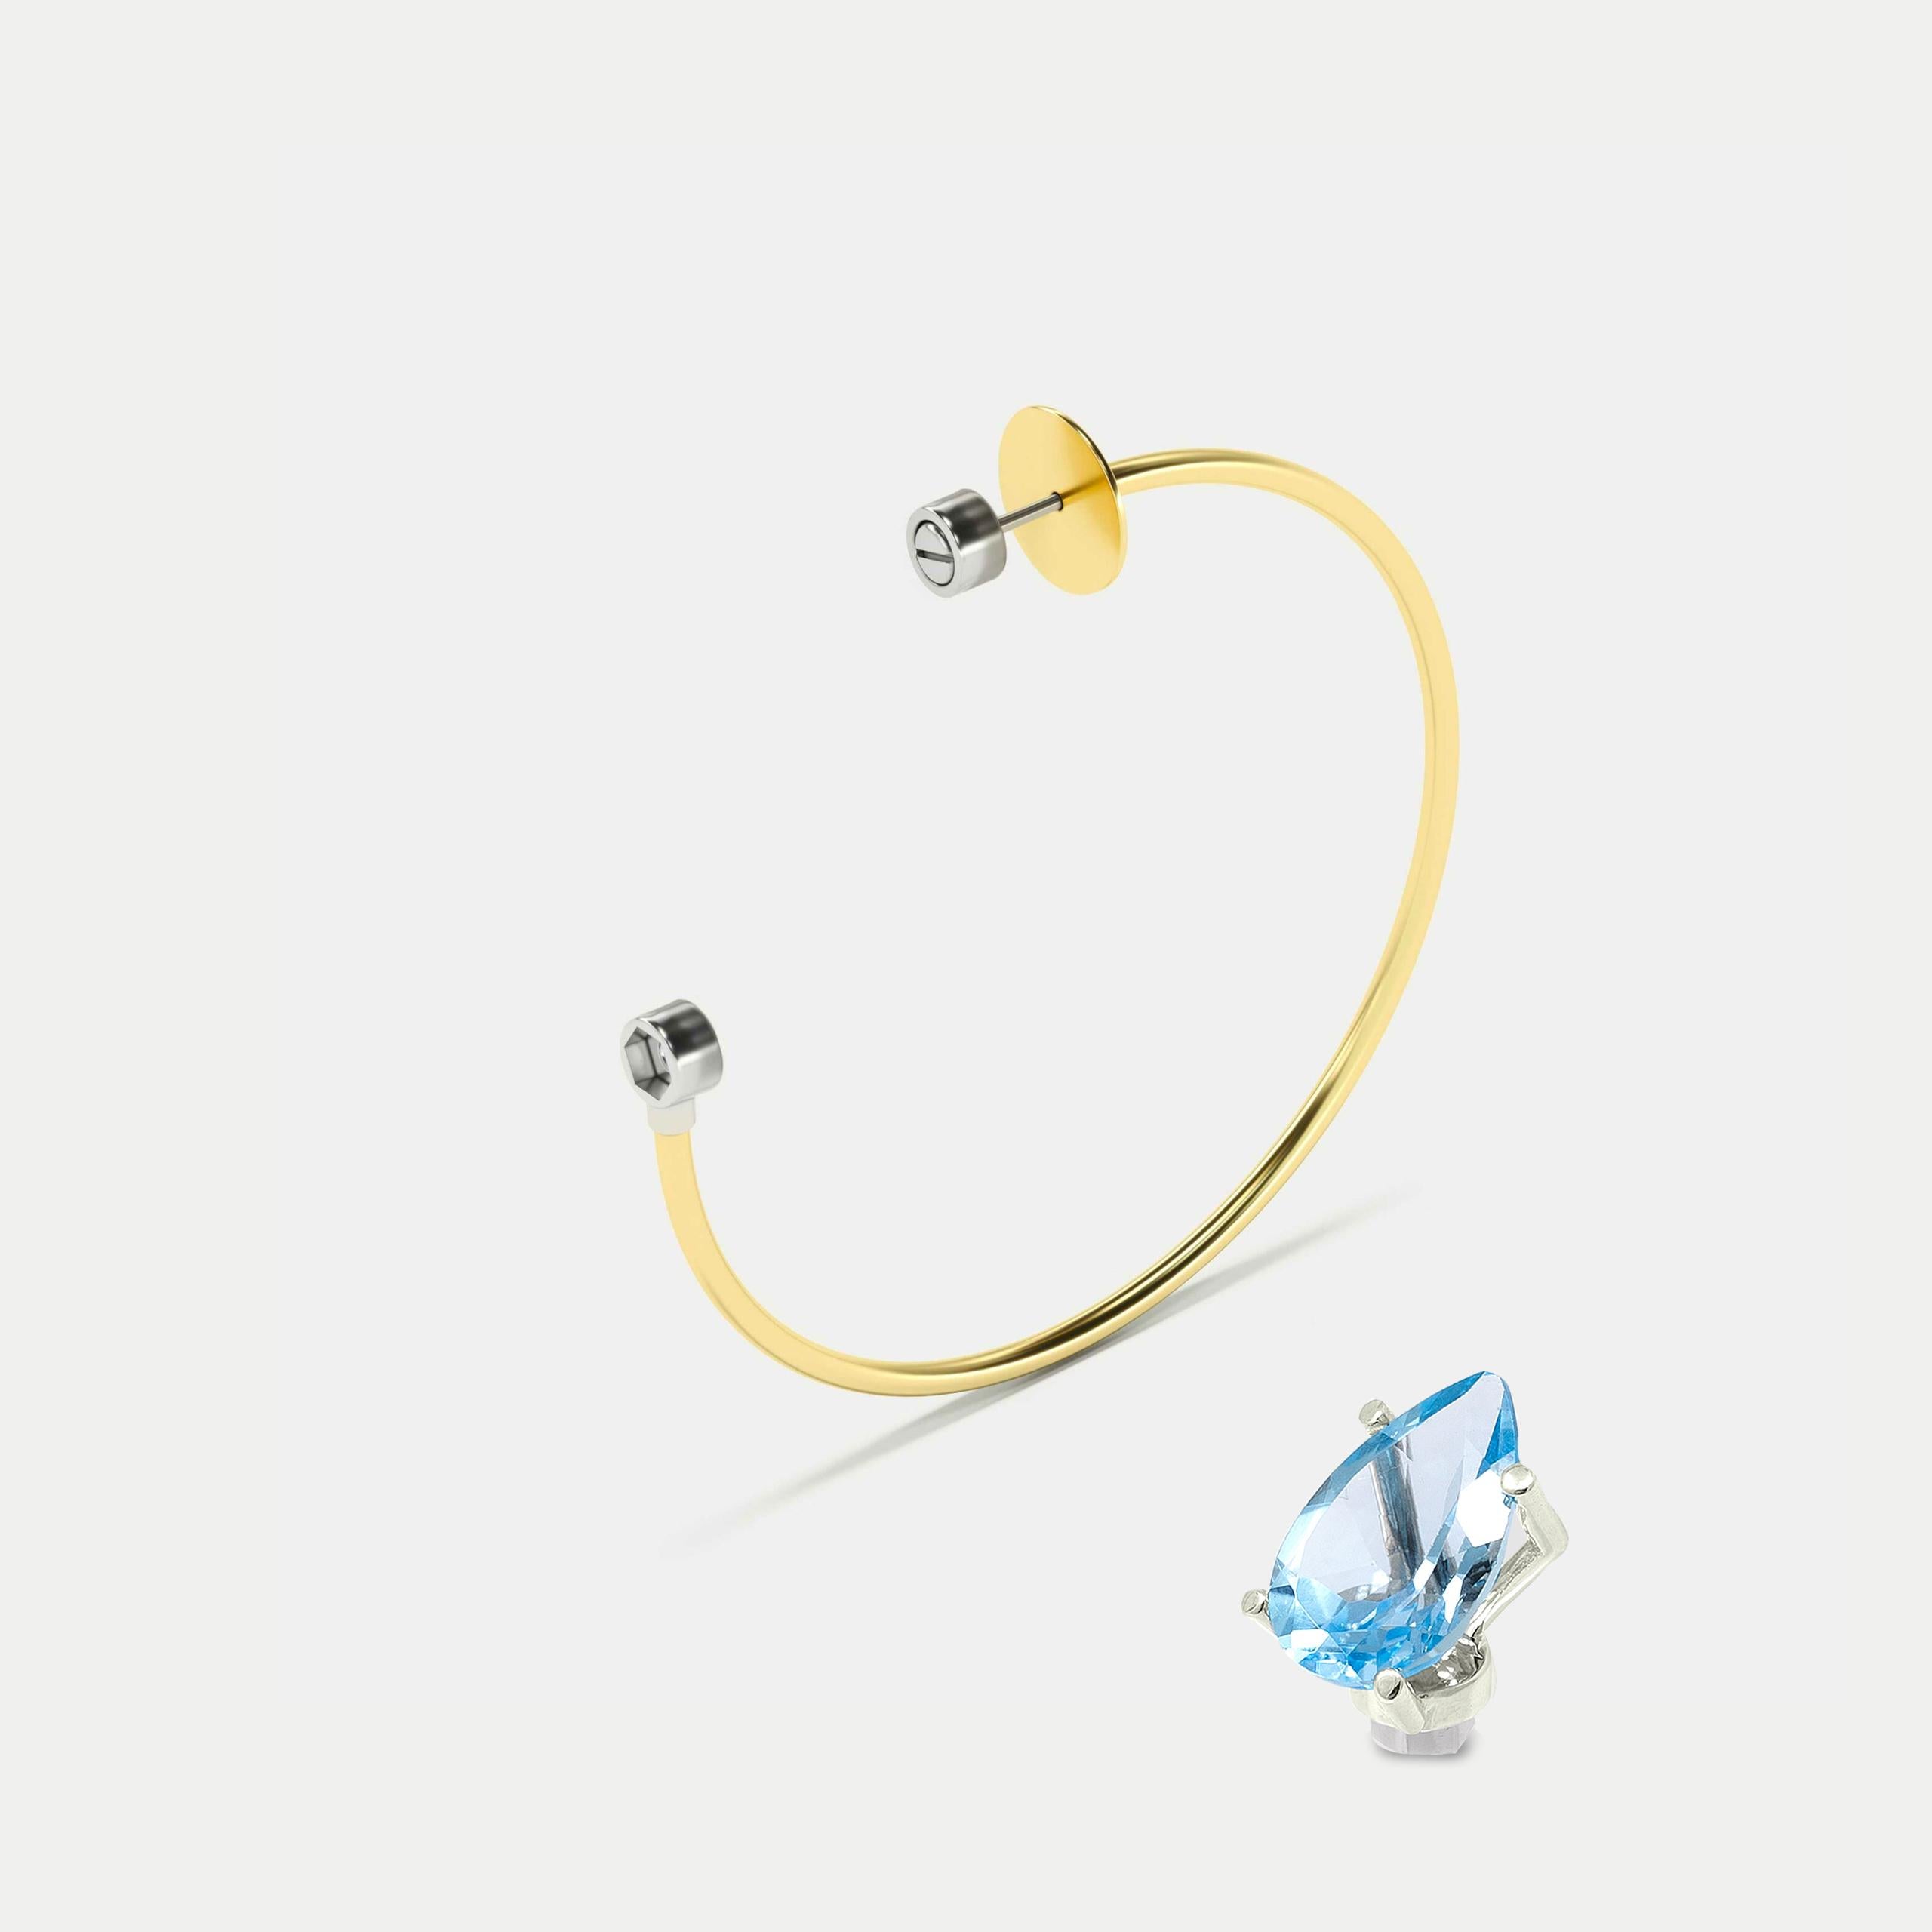 Mono hoop earring with removable blue light blue topaz, 18K.

-Hoop earring (60 mm ⌀ ) Yellow gold, 18K. 
-Blue sky topaz, pear-cut White gold head, 18K.
-Post and bracket are made of steel, which provides a secure closure of the earring and